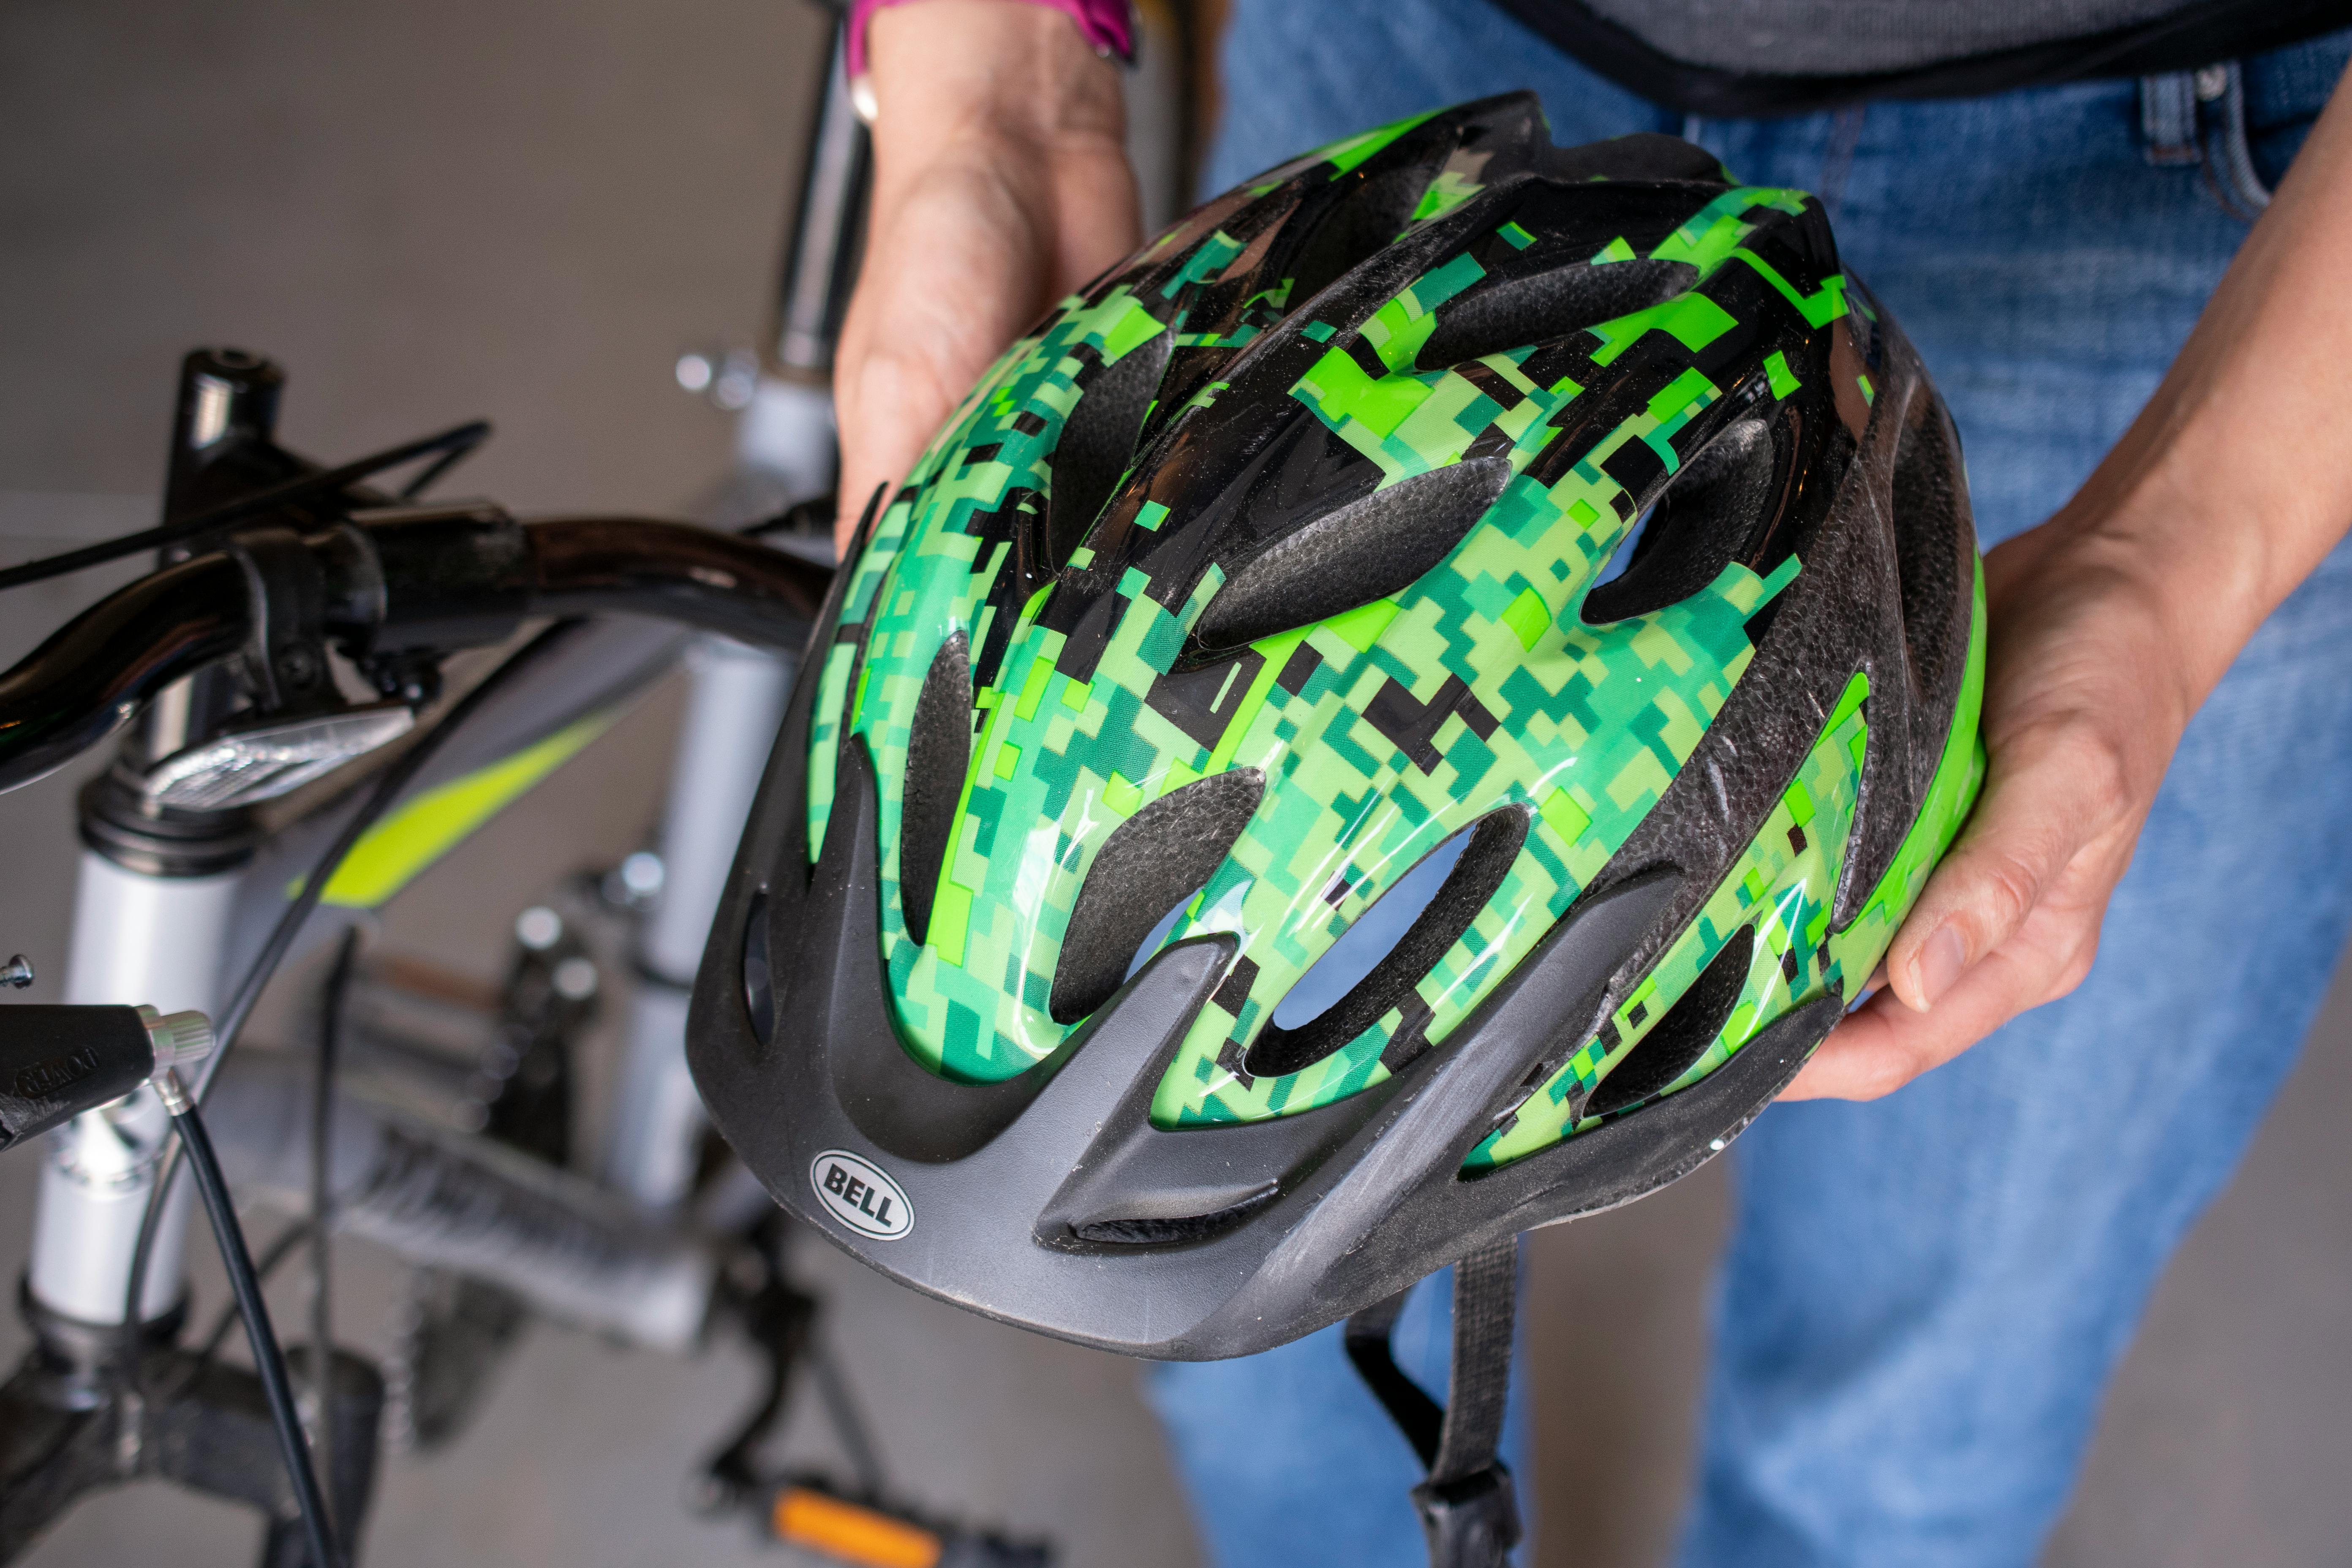 A person holding a green and black helmet